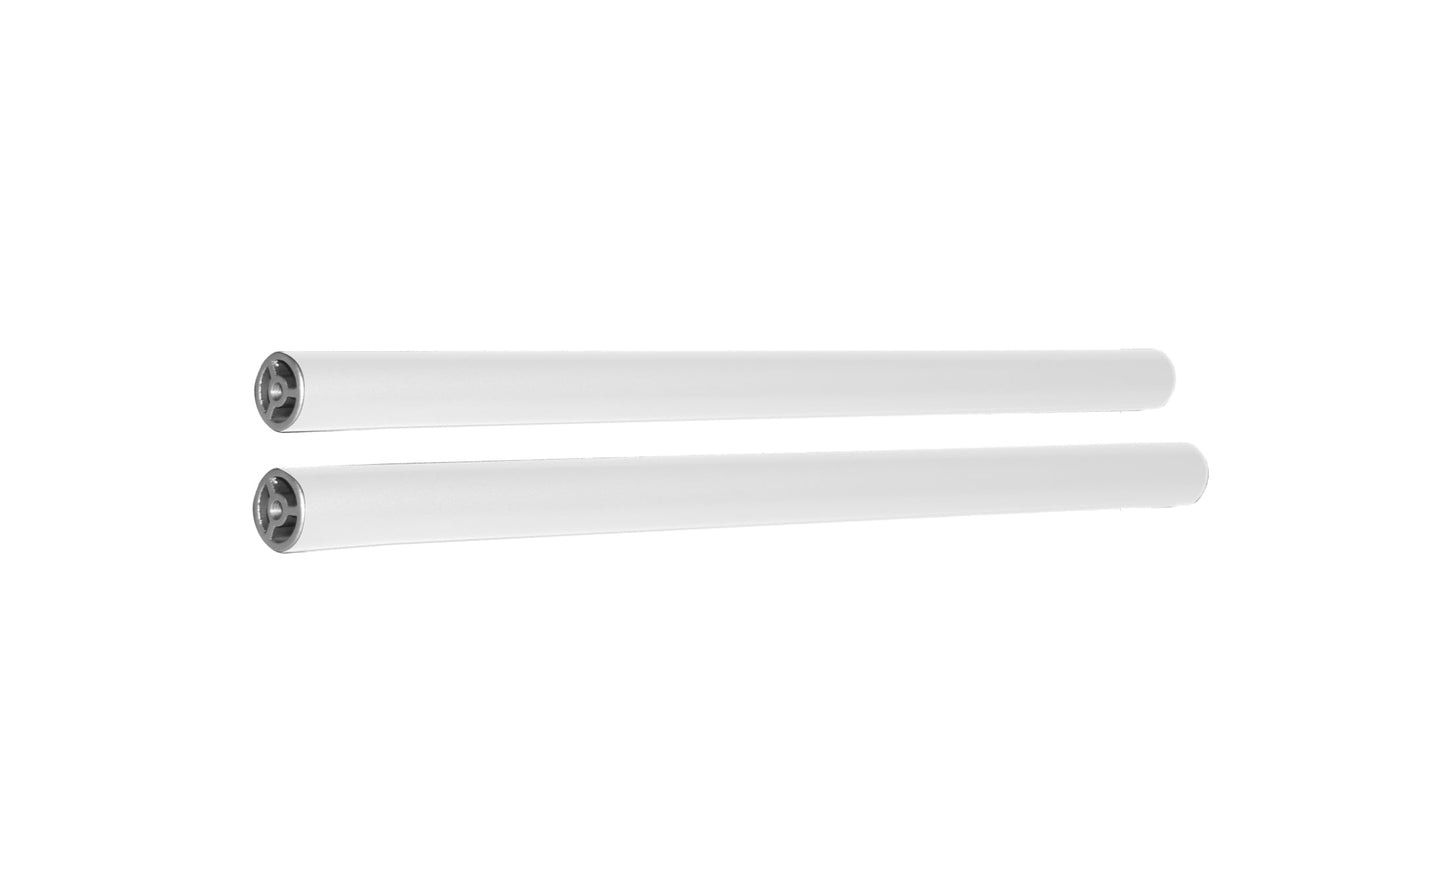 500mm Extension Rods White - HEATSCOPE® Accessory